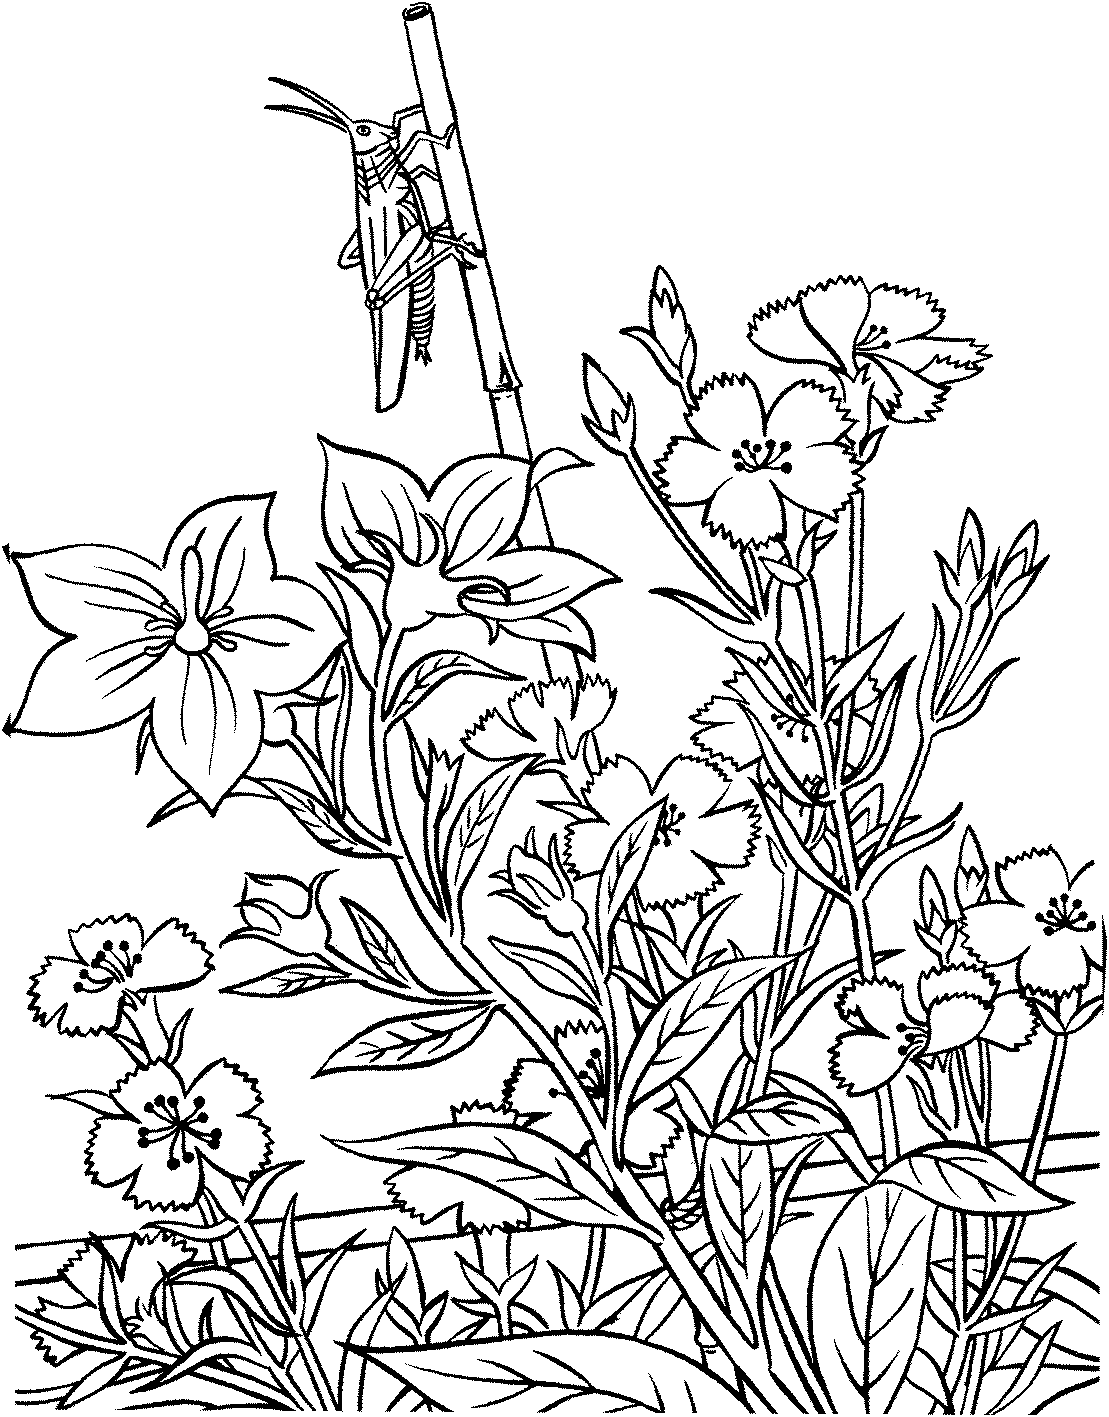 Gardening coloring pages to download and print for free